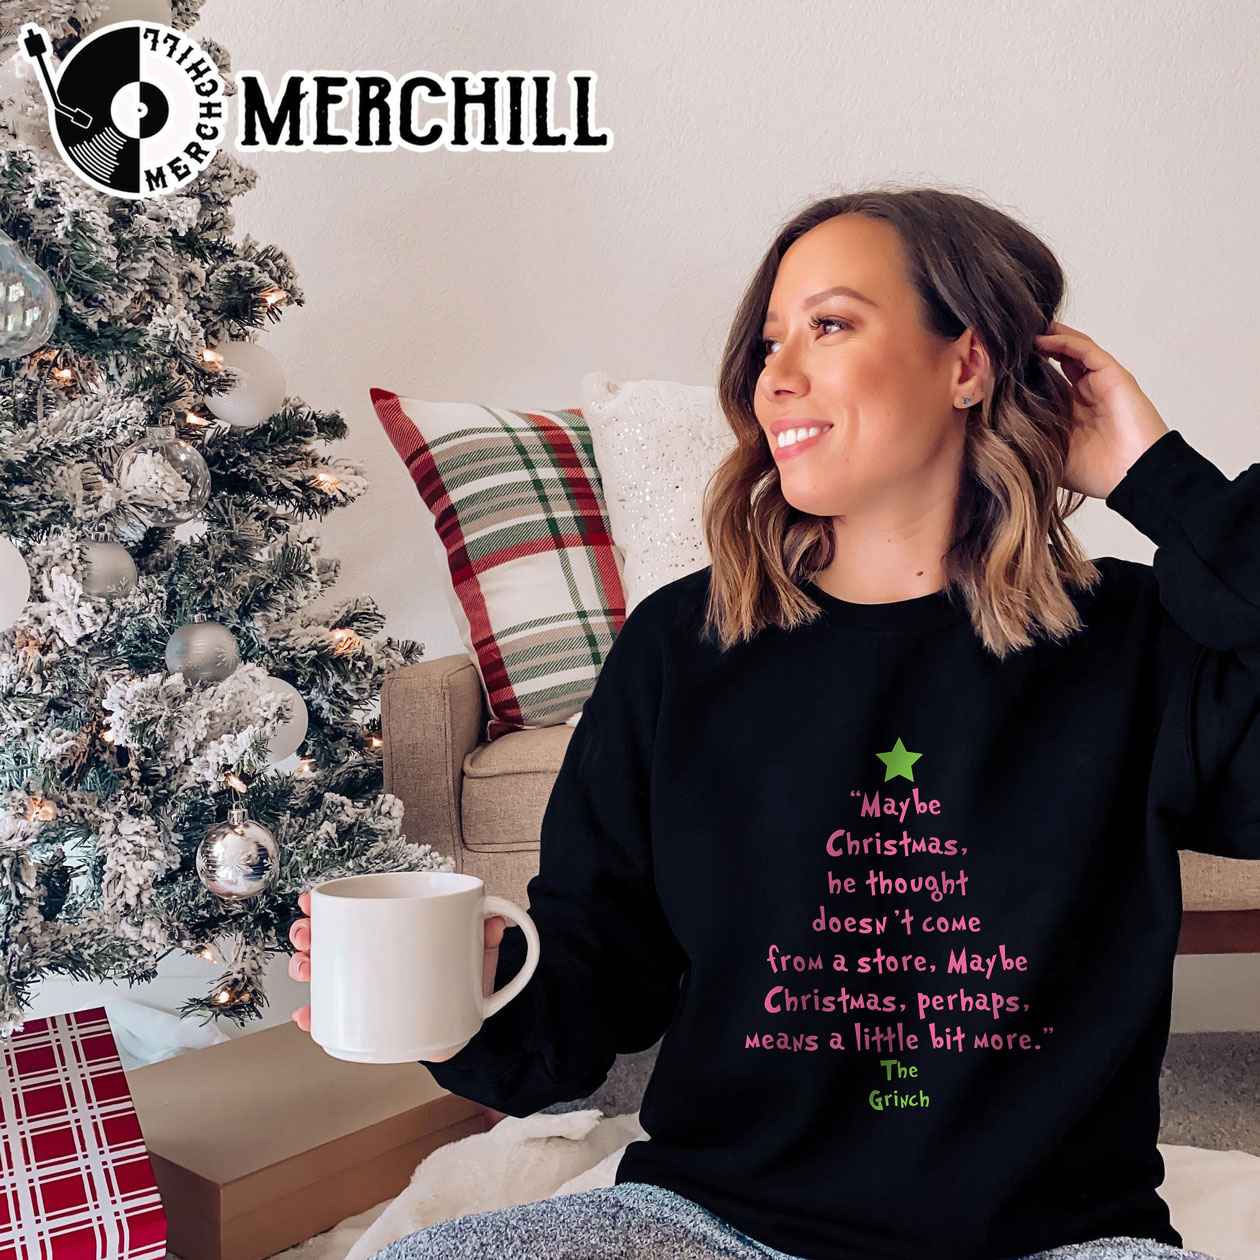 https://images.merchill.com/wp-content/uploads/2023/10/Grinch-Christmas-Sweatshirt-Maybe-Christmas-He-Thought-Doesnt-Come-from-a-Store-4.jpg